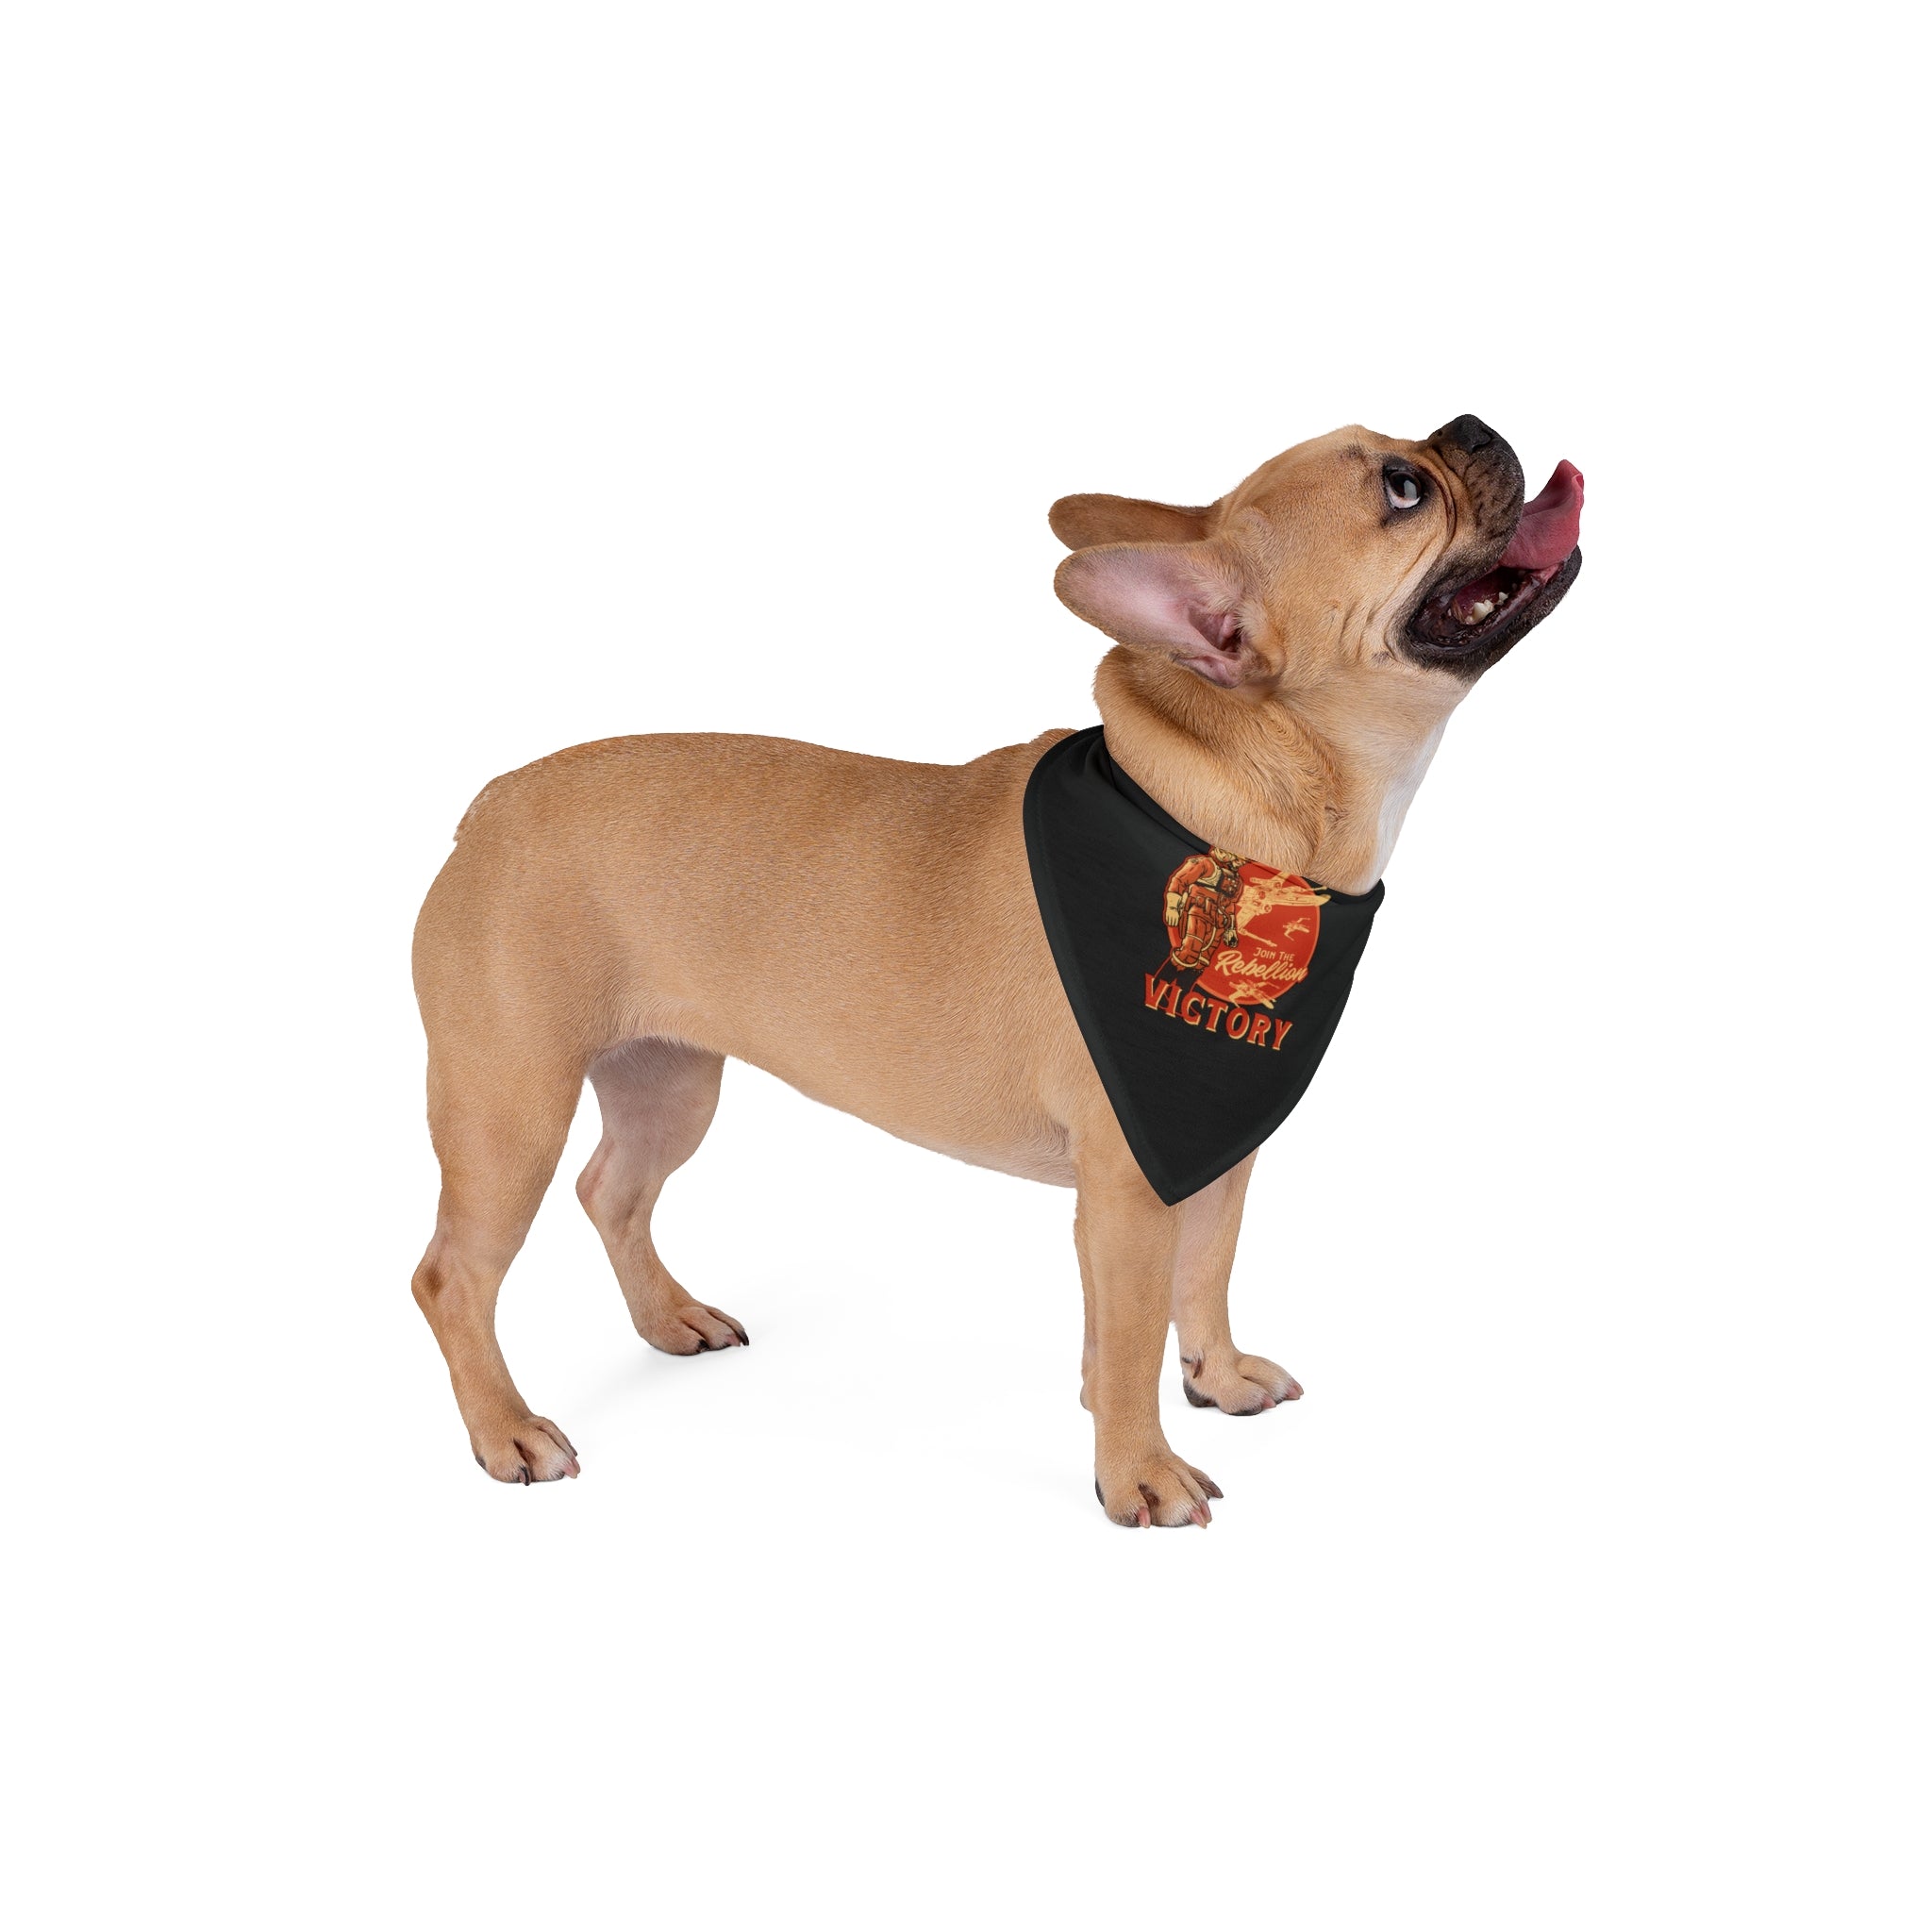 A light brown French Bulldog wearing a "Wings of Victory - Pet Bandana" with a red and gold emblem looks upward with its mouth open and tongue out, showcasing style and comfort for pets.